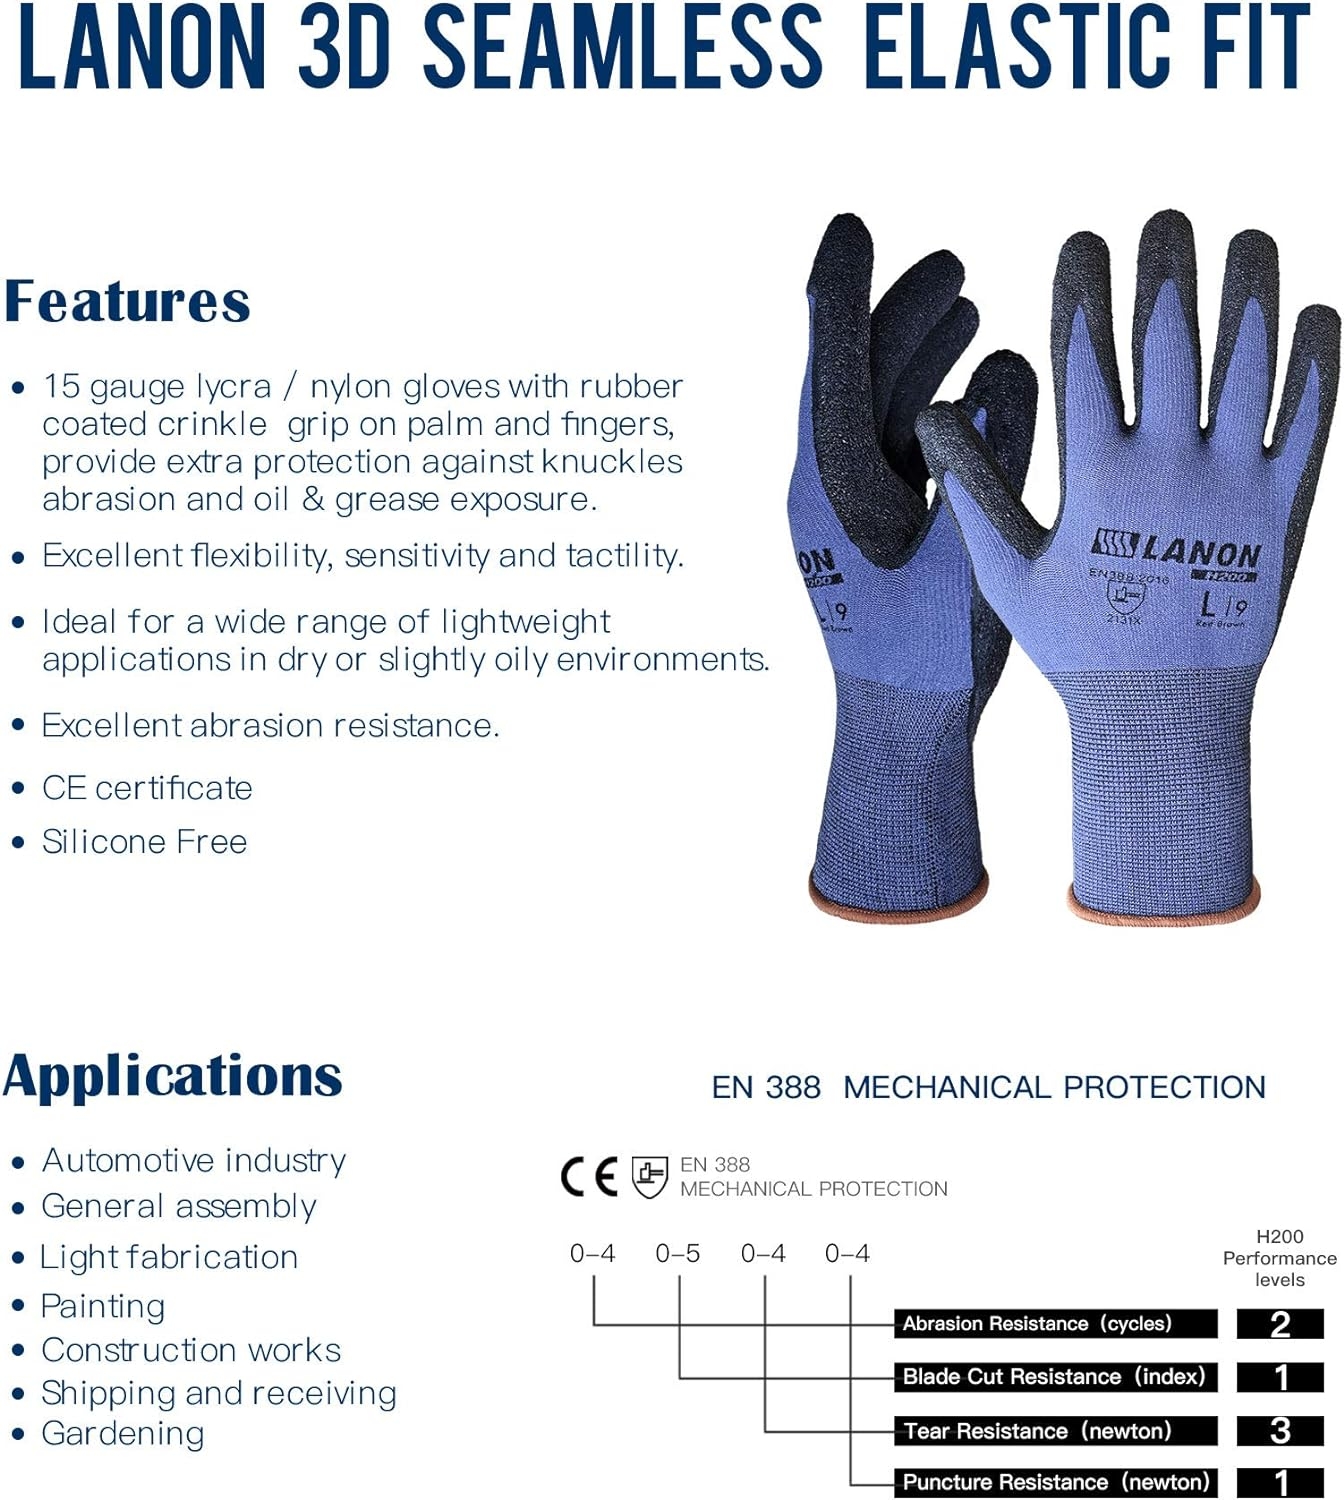 LANON 3 Pairs Safety Work Gloves, 3D Seamless Elastic Fit, Nylon with Lycra Liner, Natural Rubber Crinkle Coating, Size 8